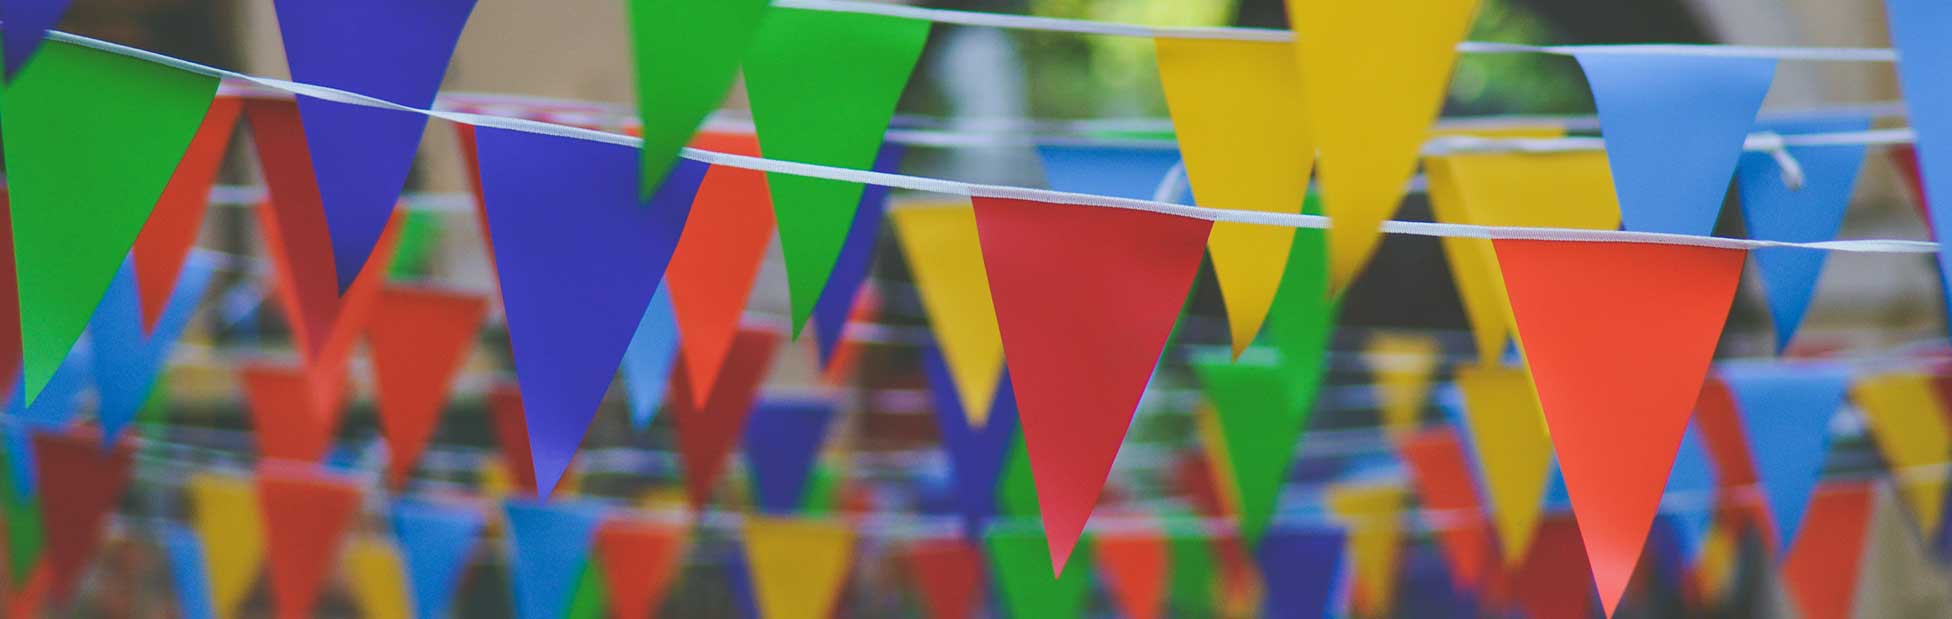 Colourful bunting hanging